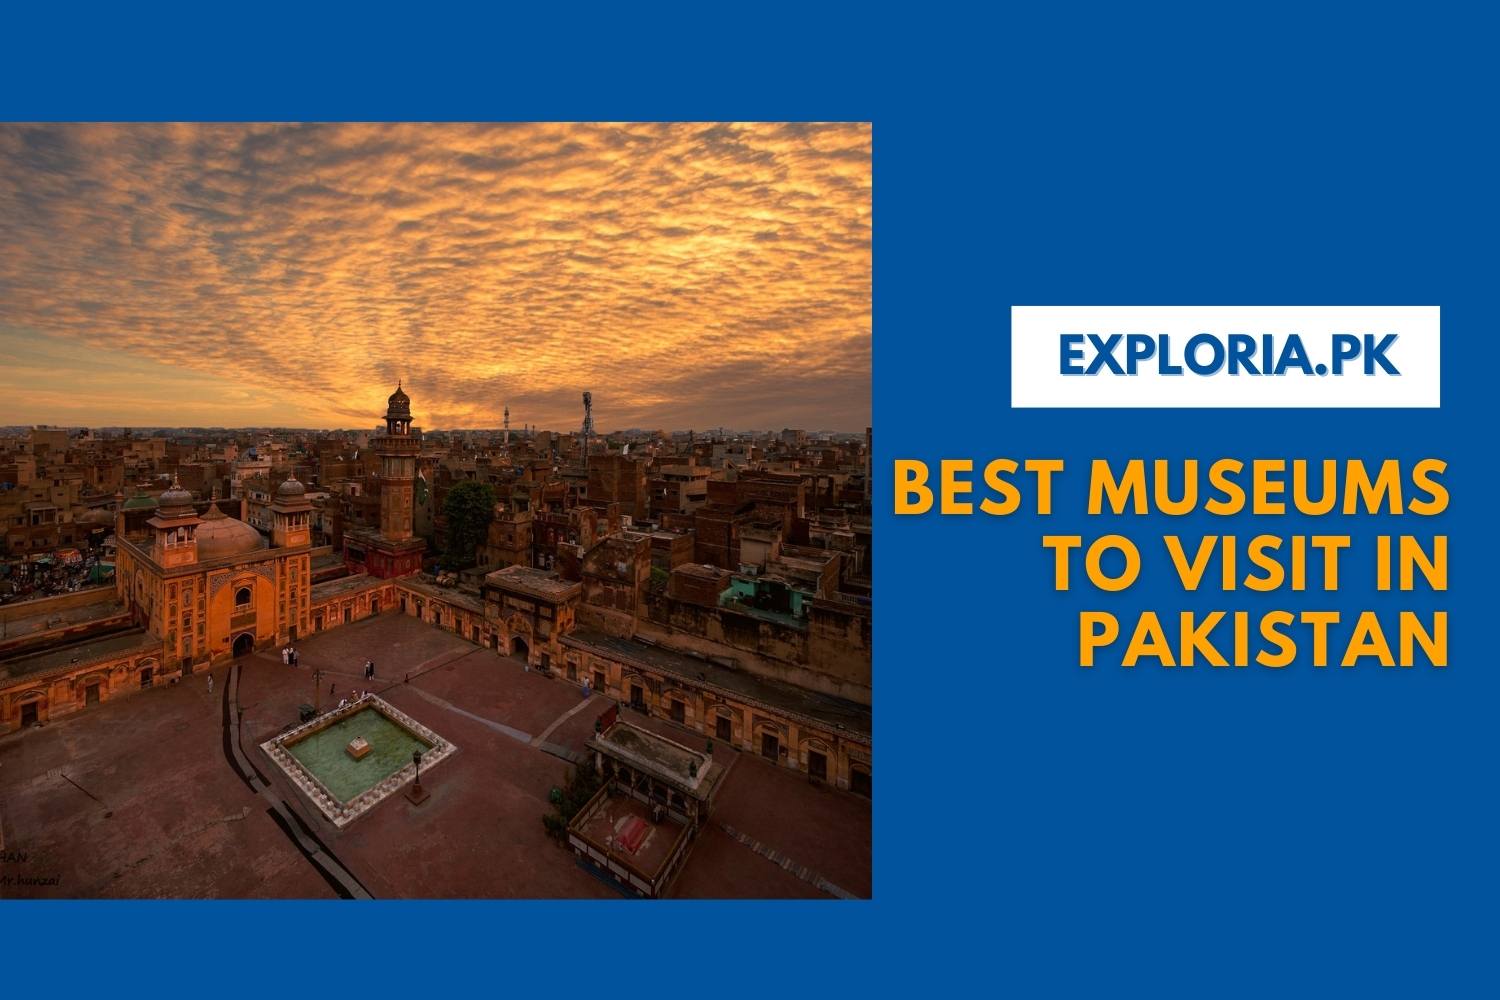 Museums to visit in Pakistan